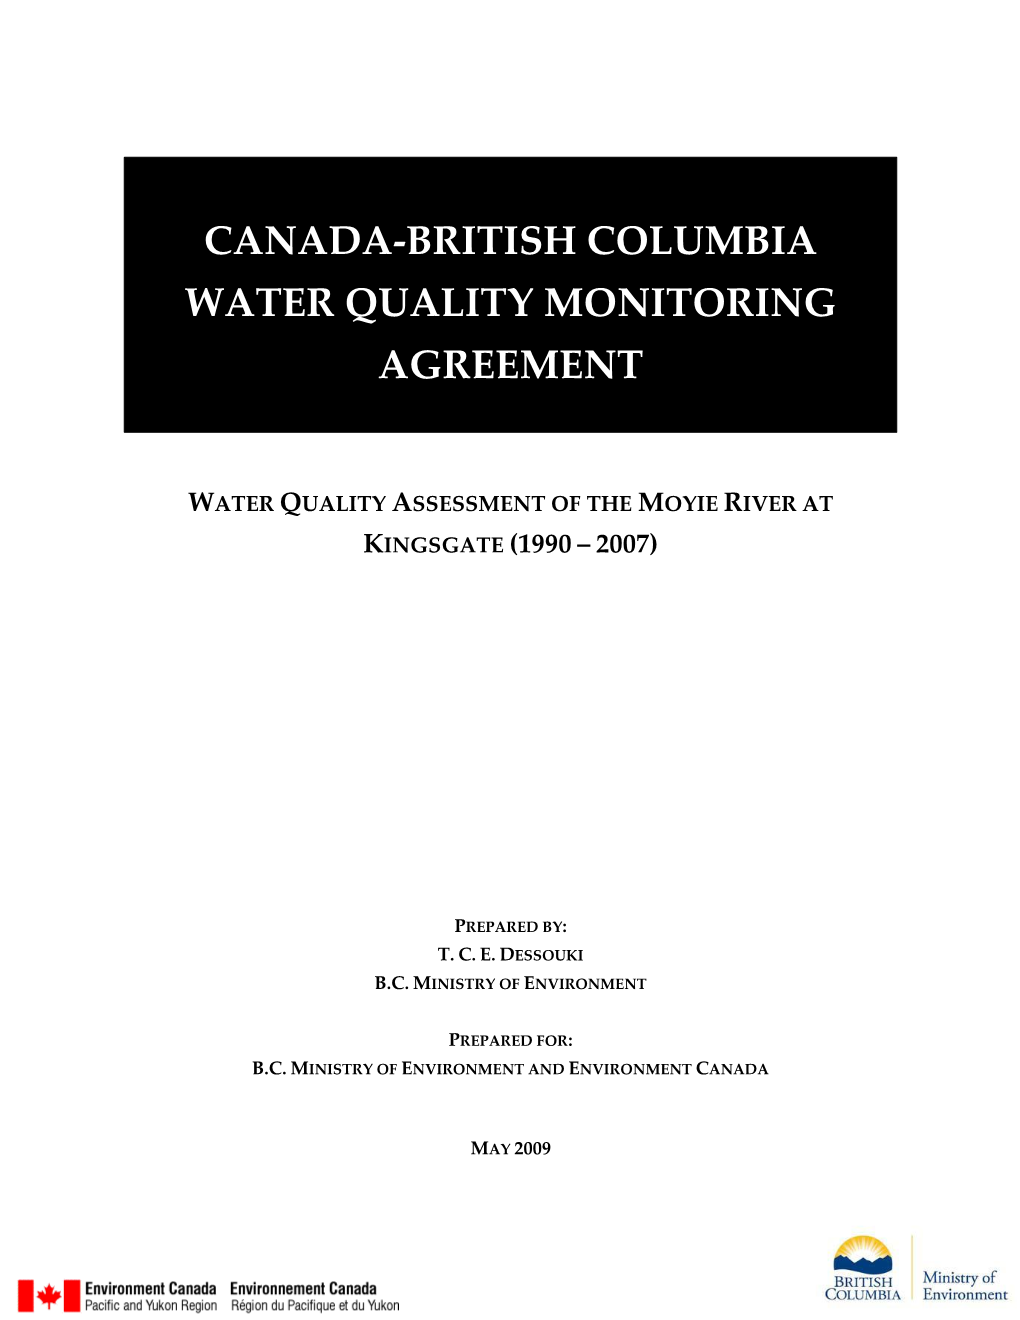 Water Quality Assessment of the Moyie River at Kingsgate, 1990-2007